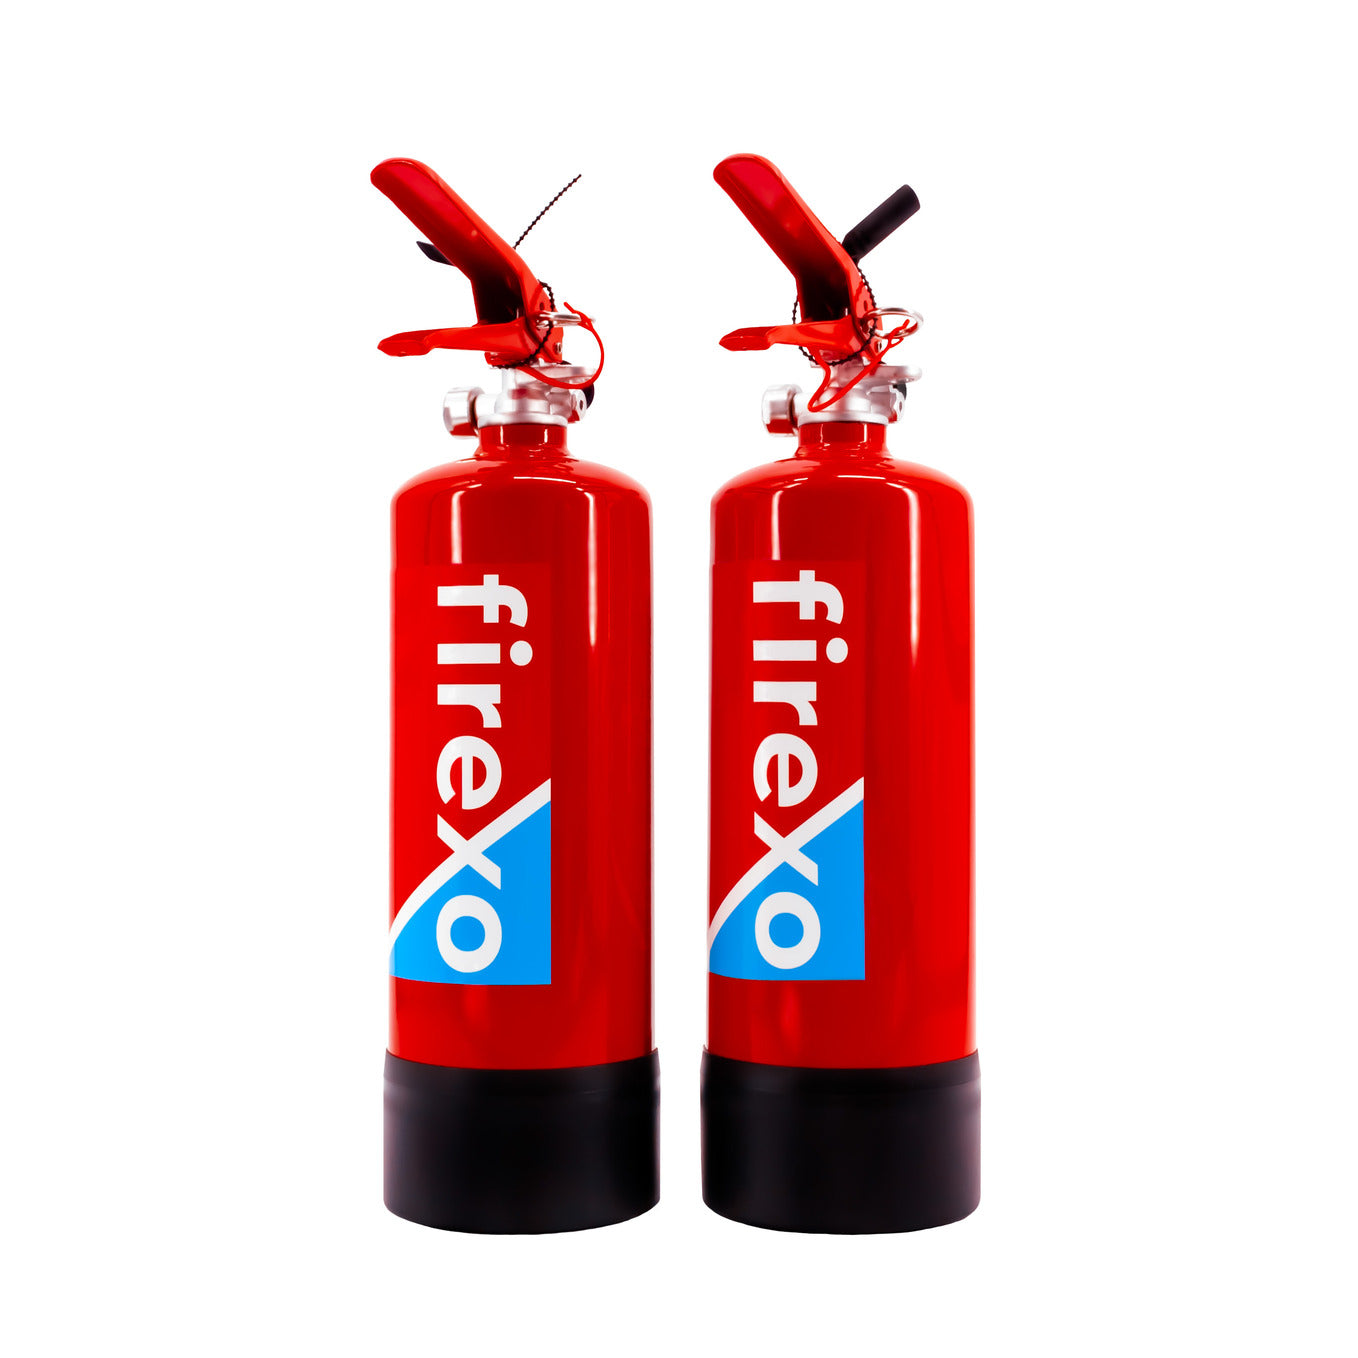 Firexo 2 Litre  Extinguishers - Duo Pack